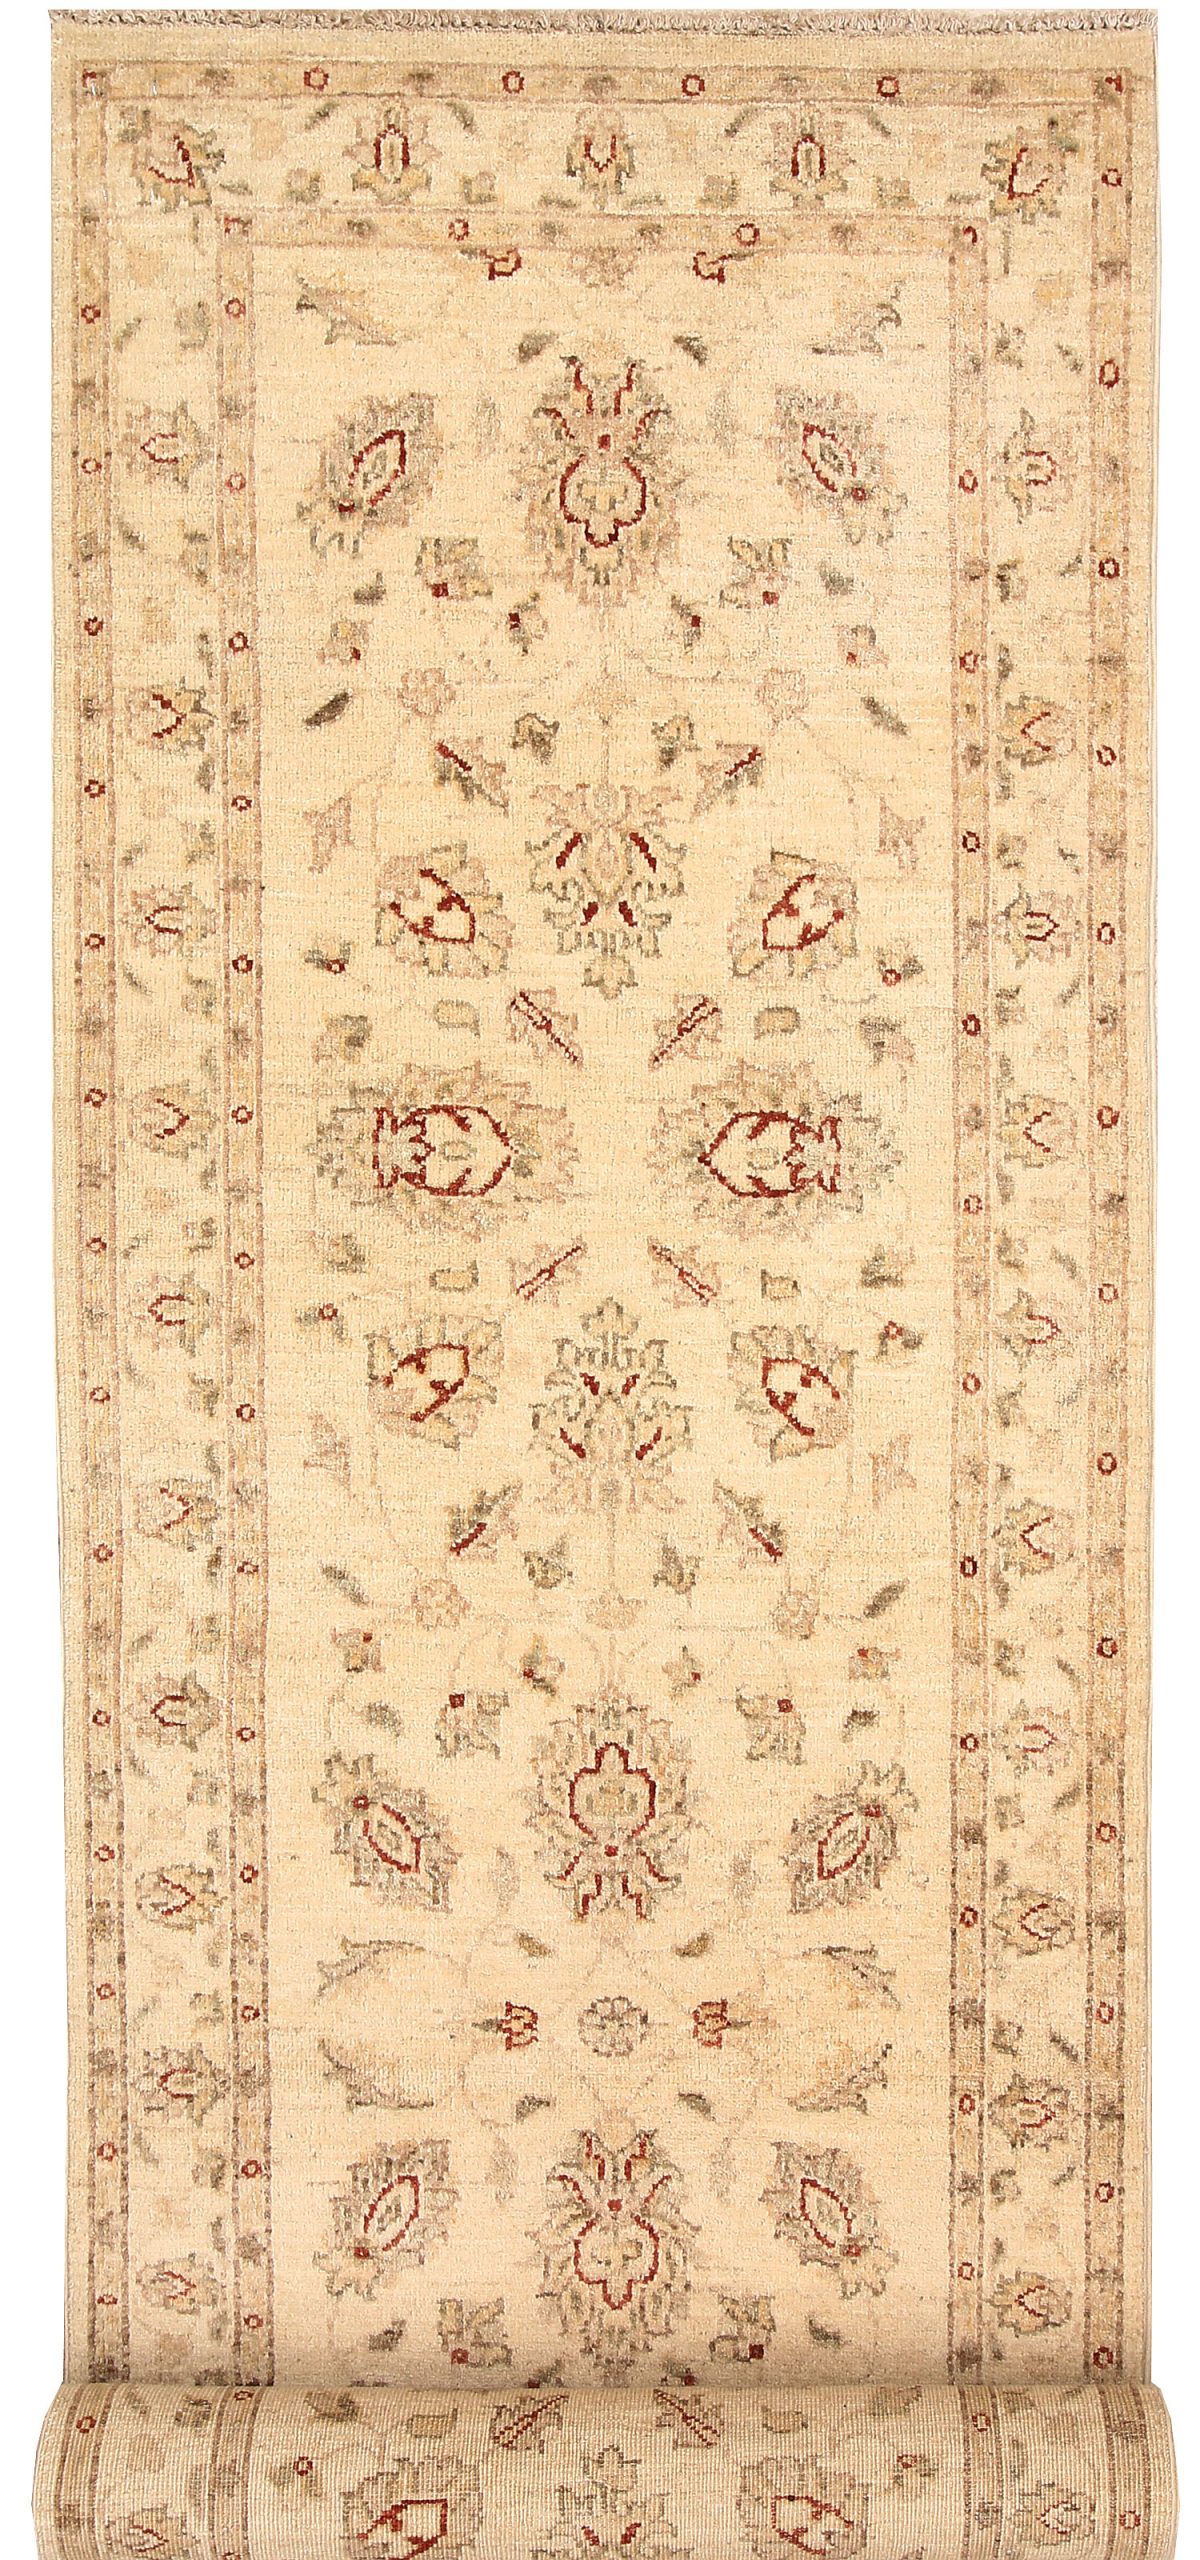 Cleaning Silk Rugs